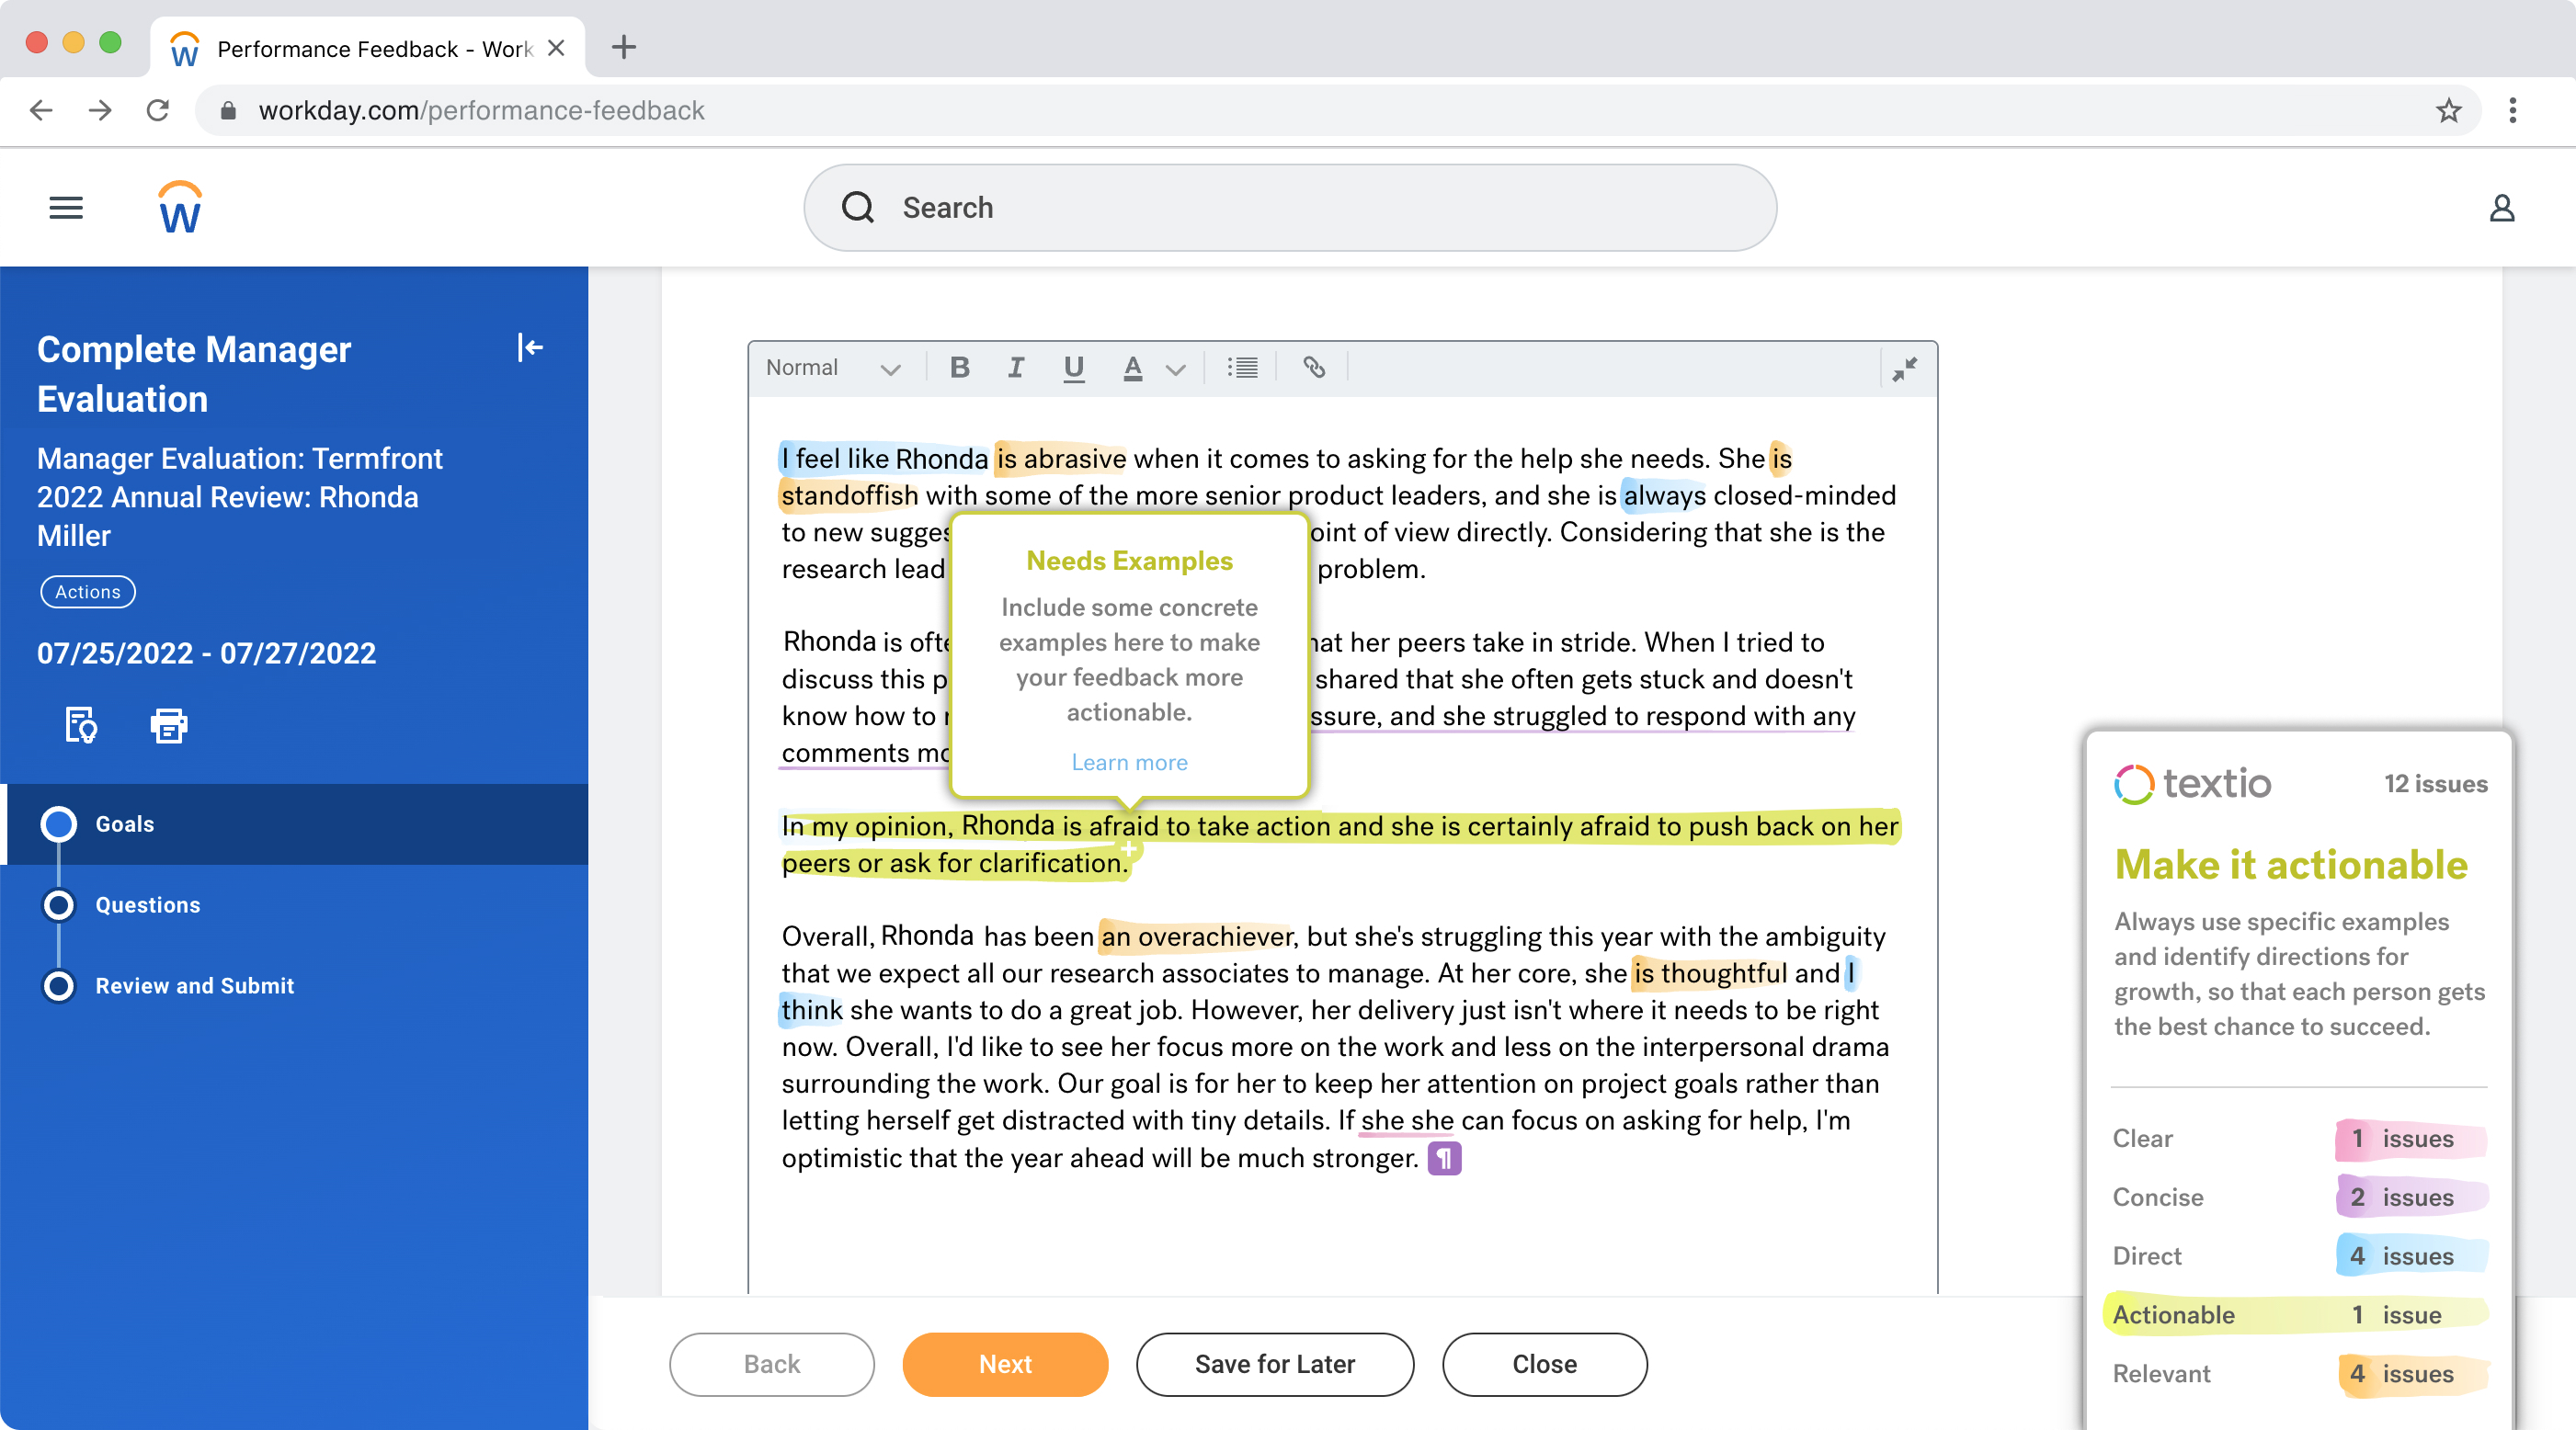 Textio for Performance Feedback within the Workday environment. 